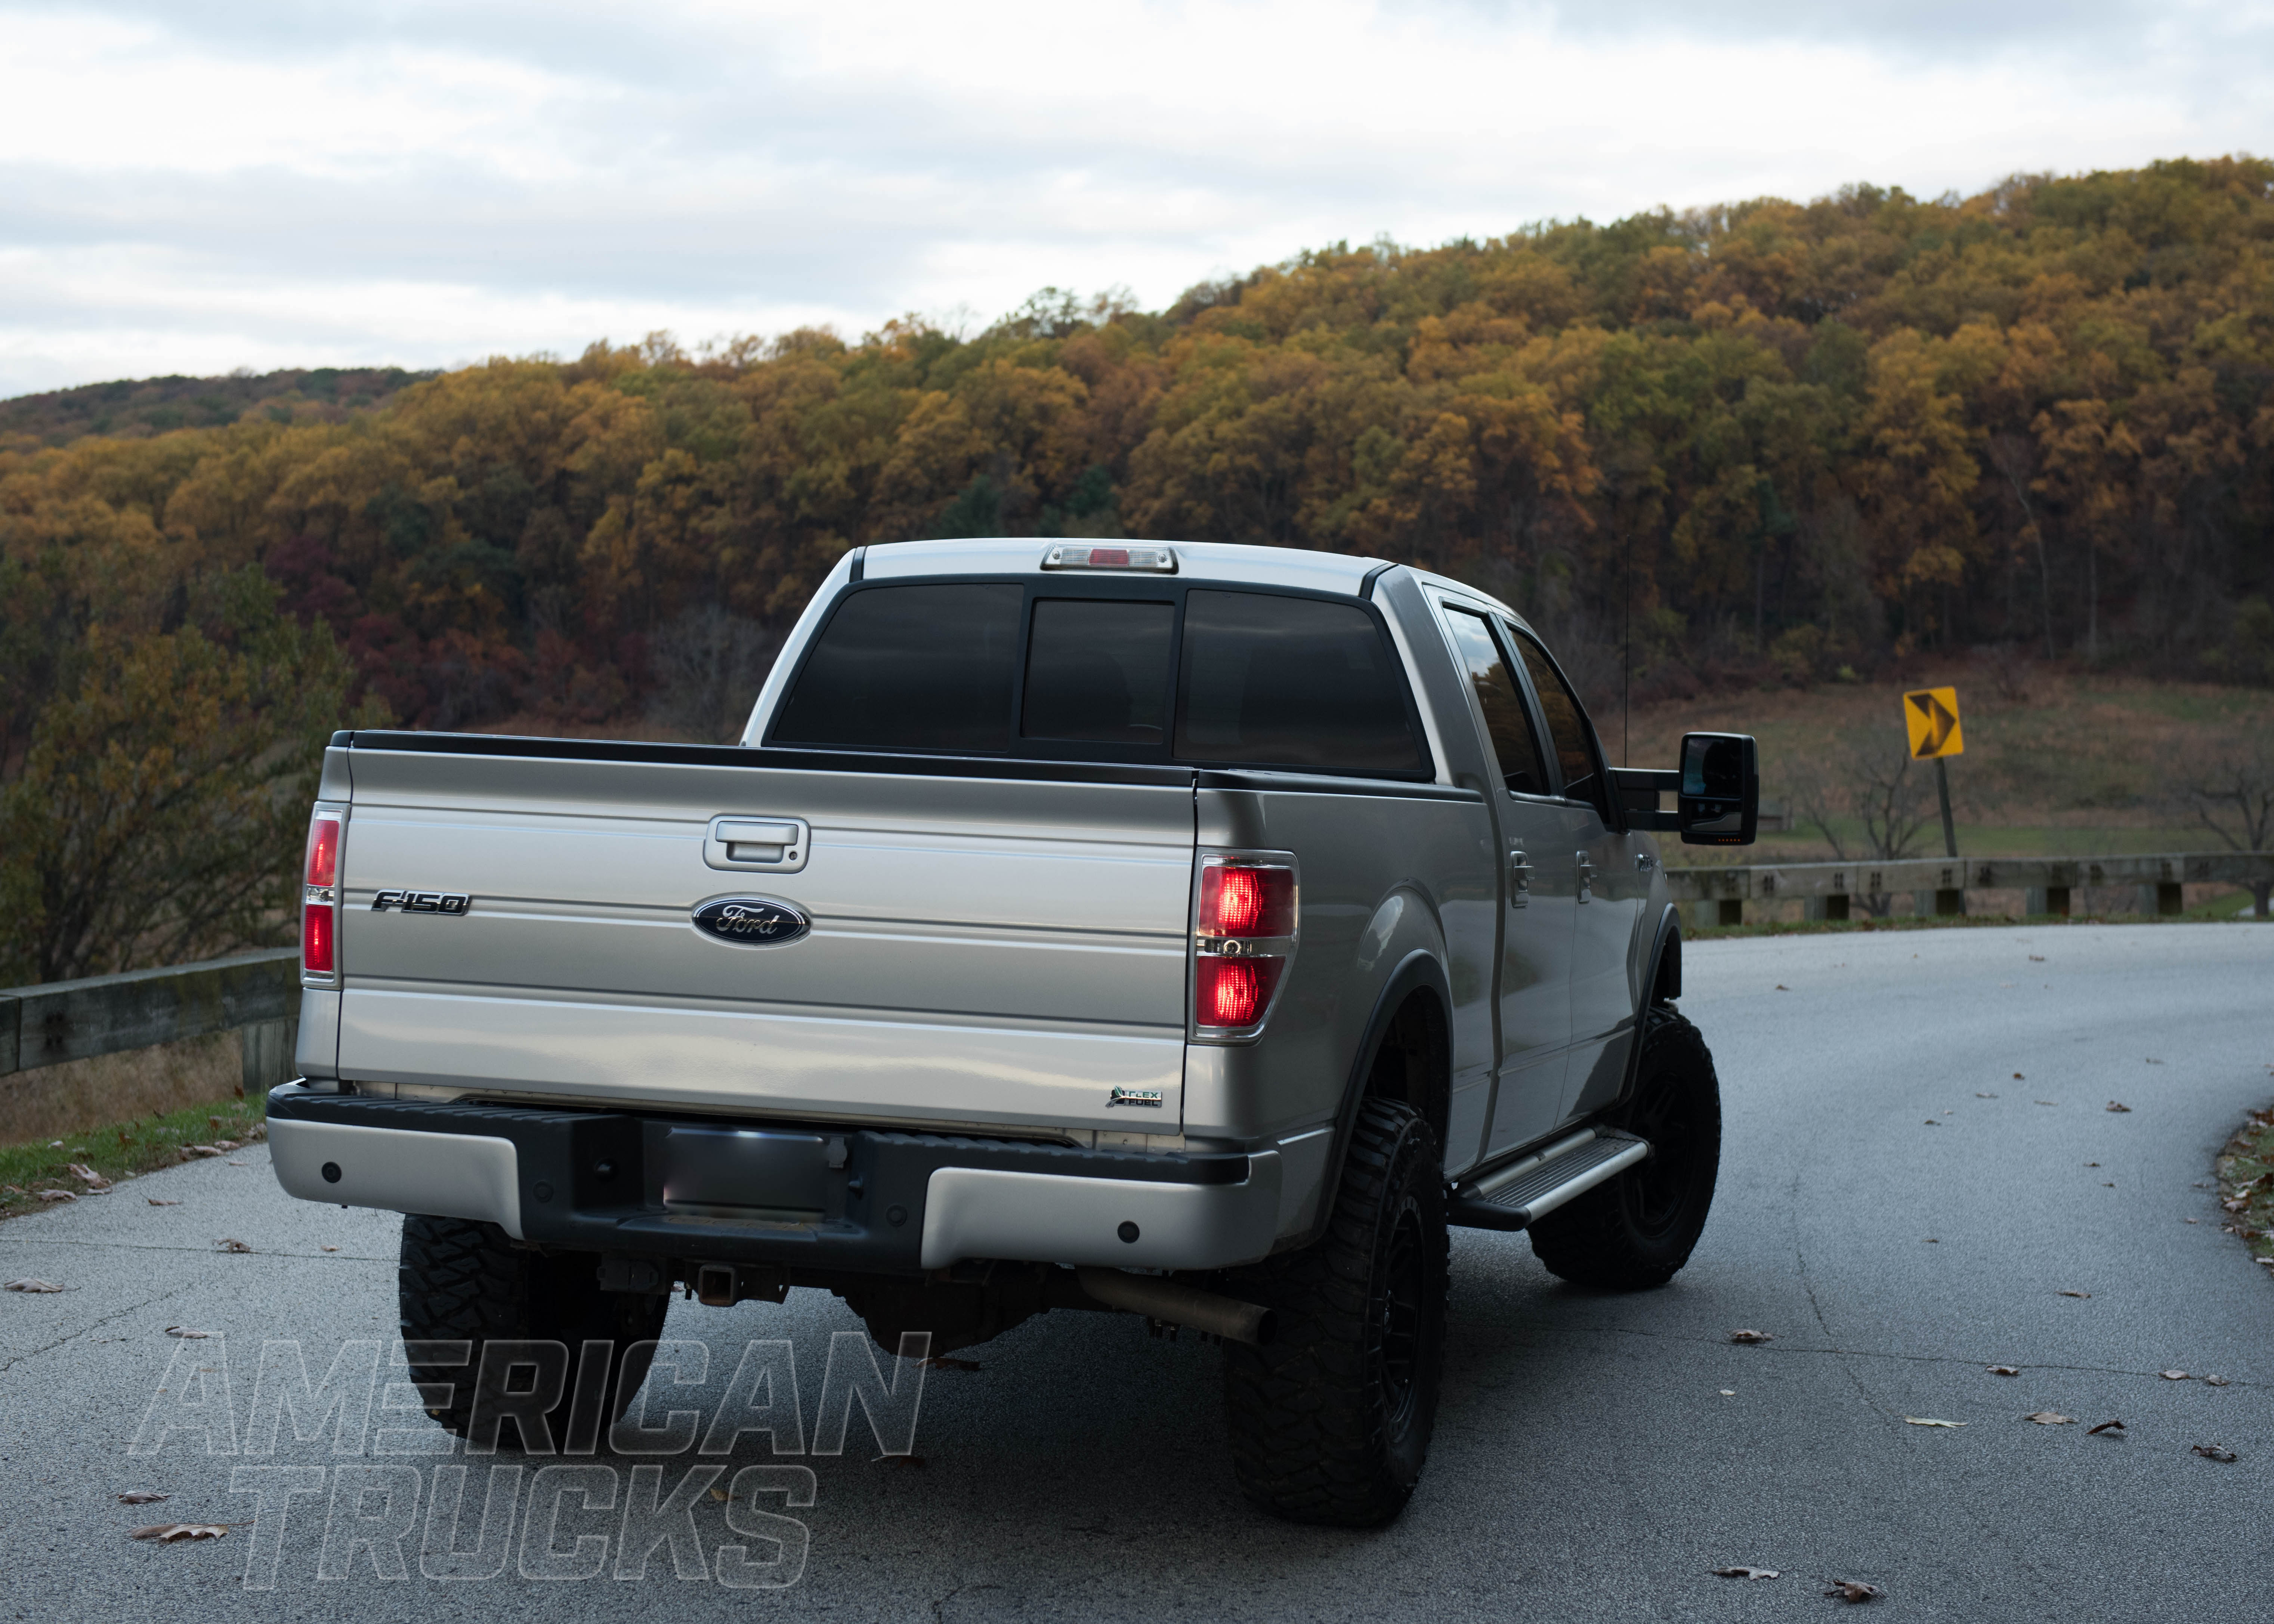 F150 on The Road with Towing Mirrors and Towing Hitch